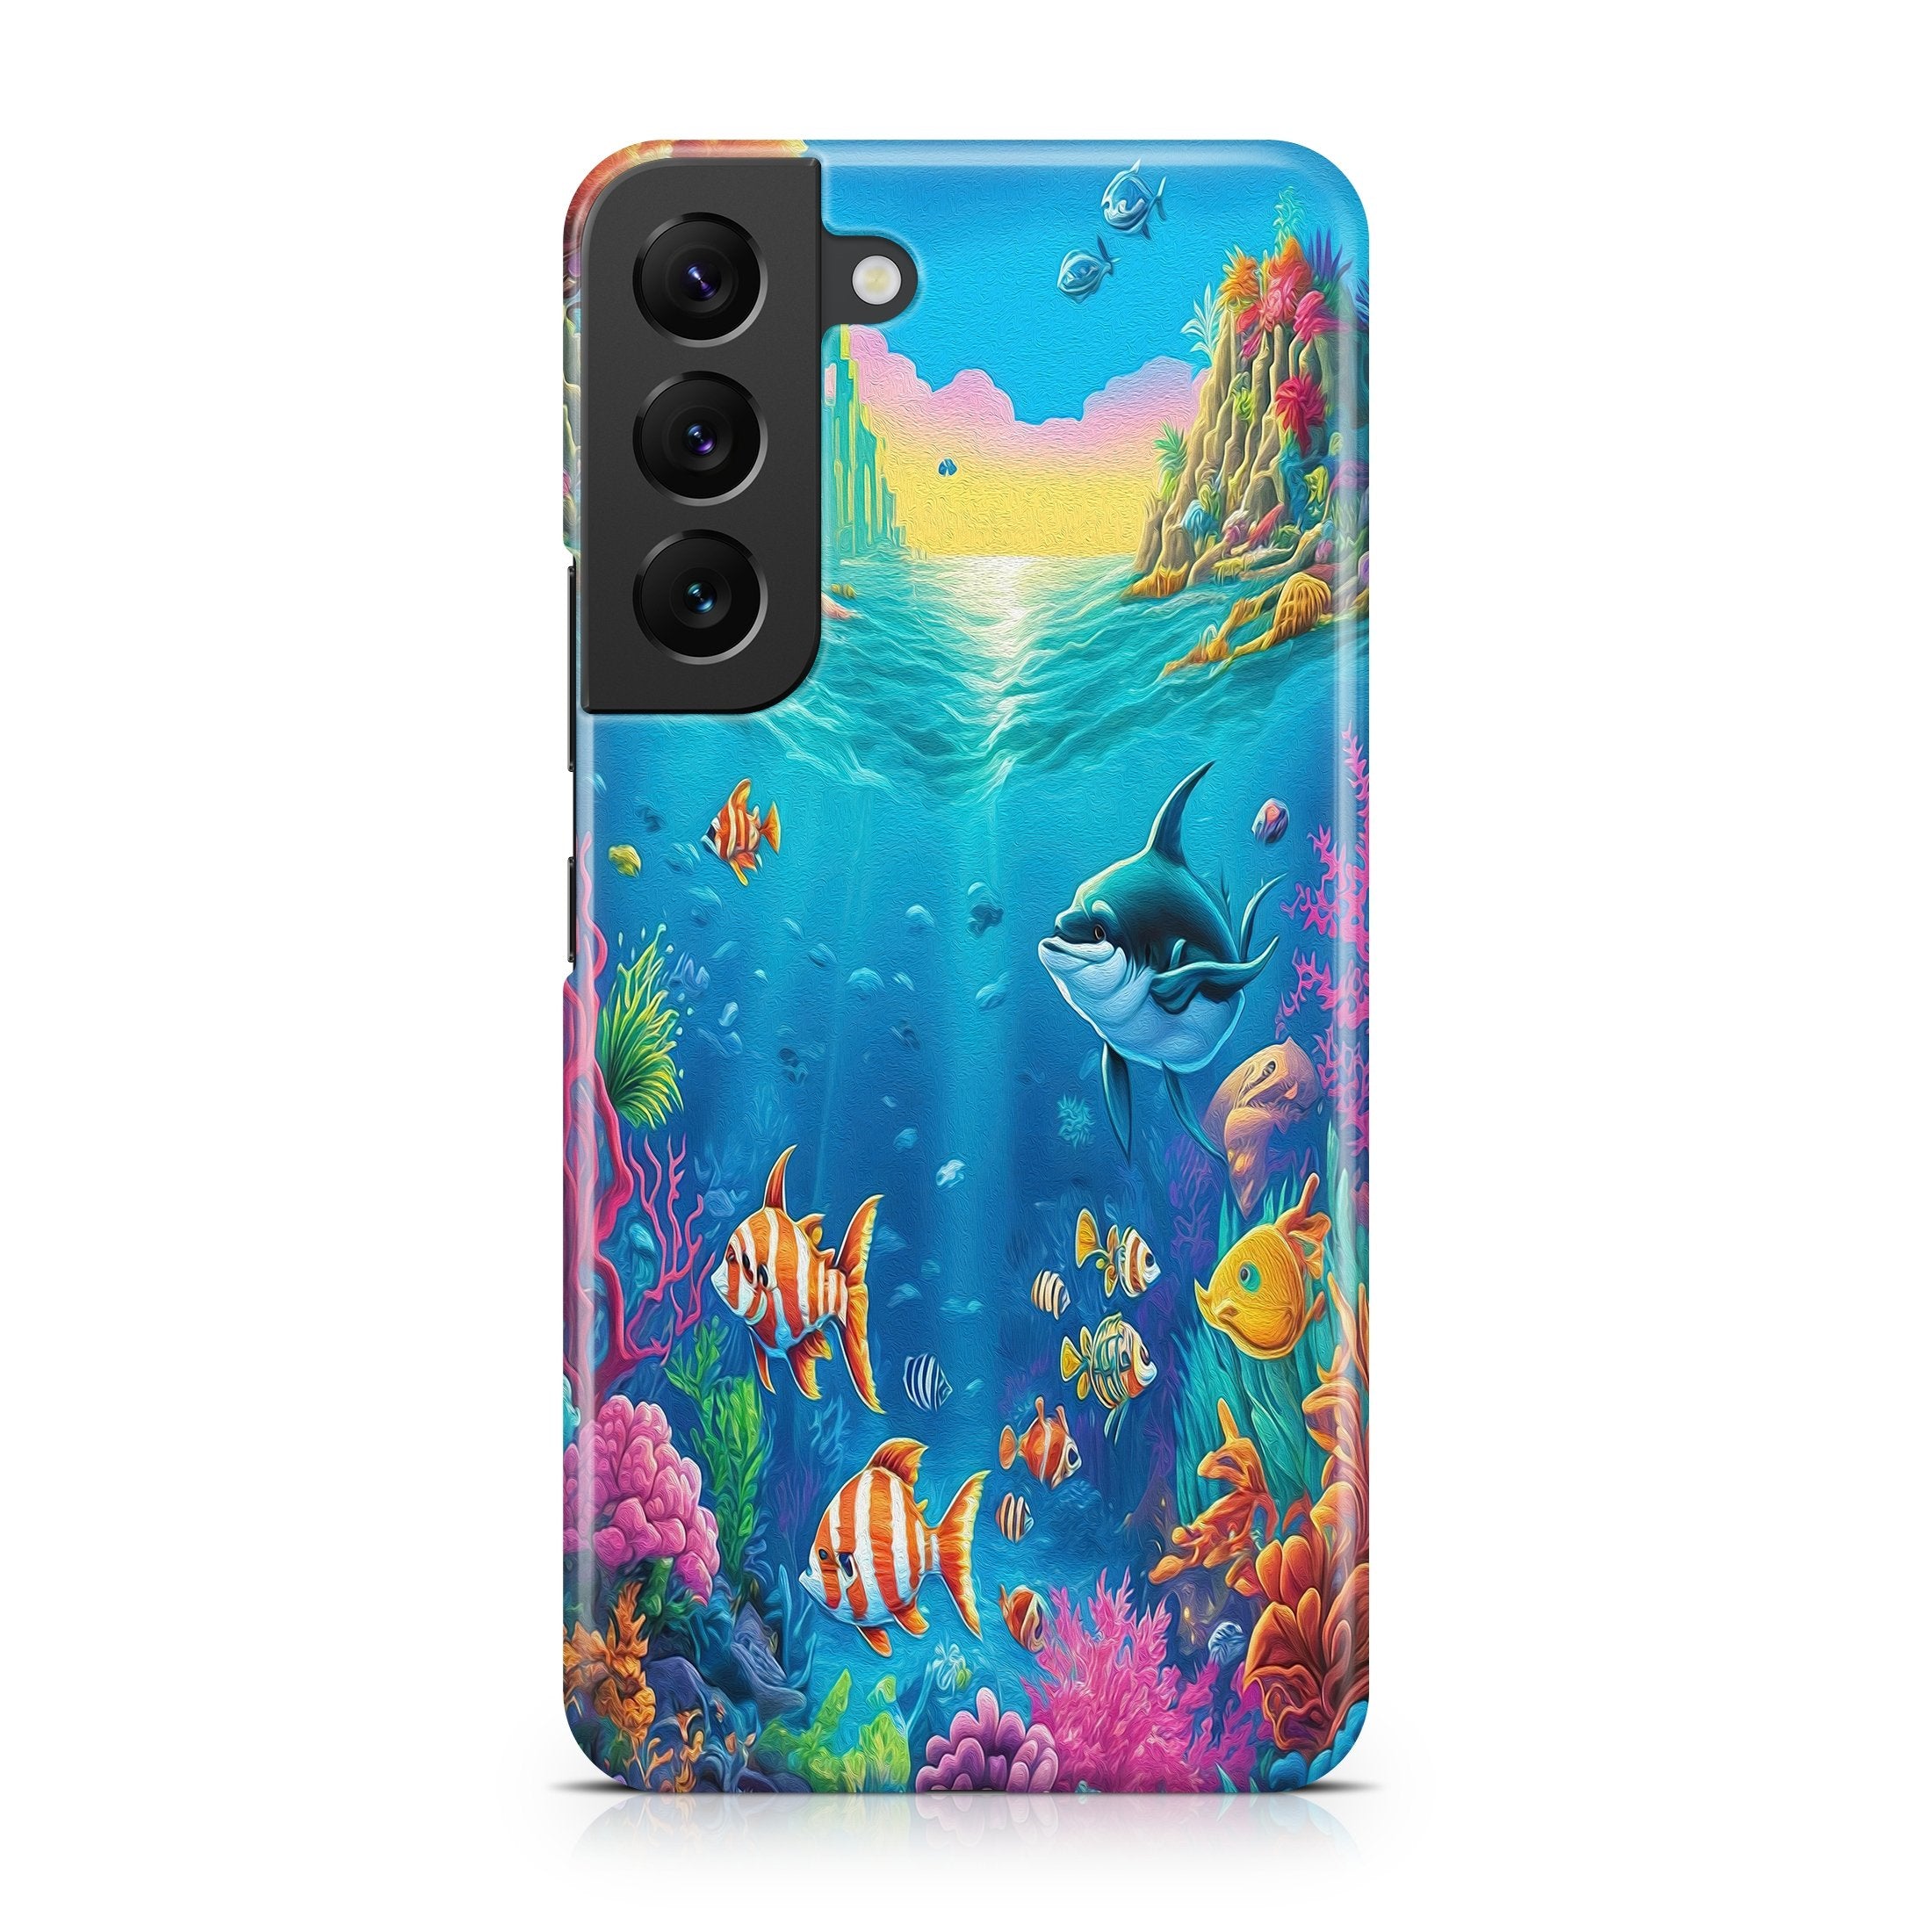 Under the Sea - Samsung phone case designs by CaseSwagger